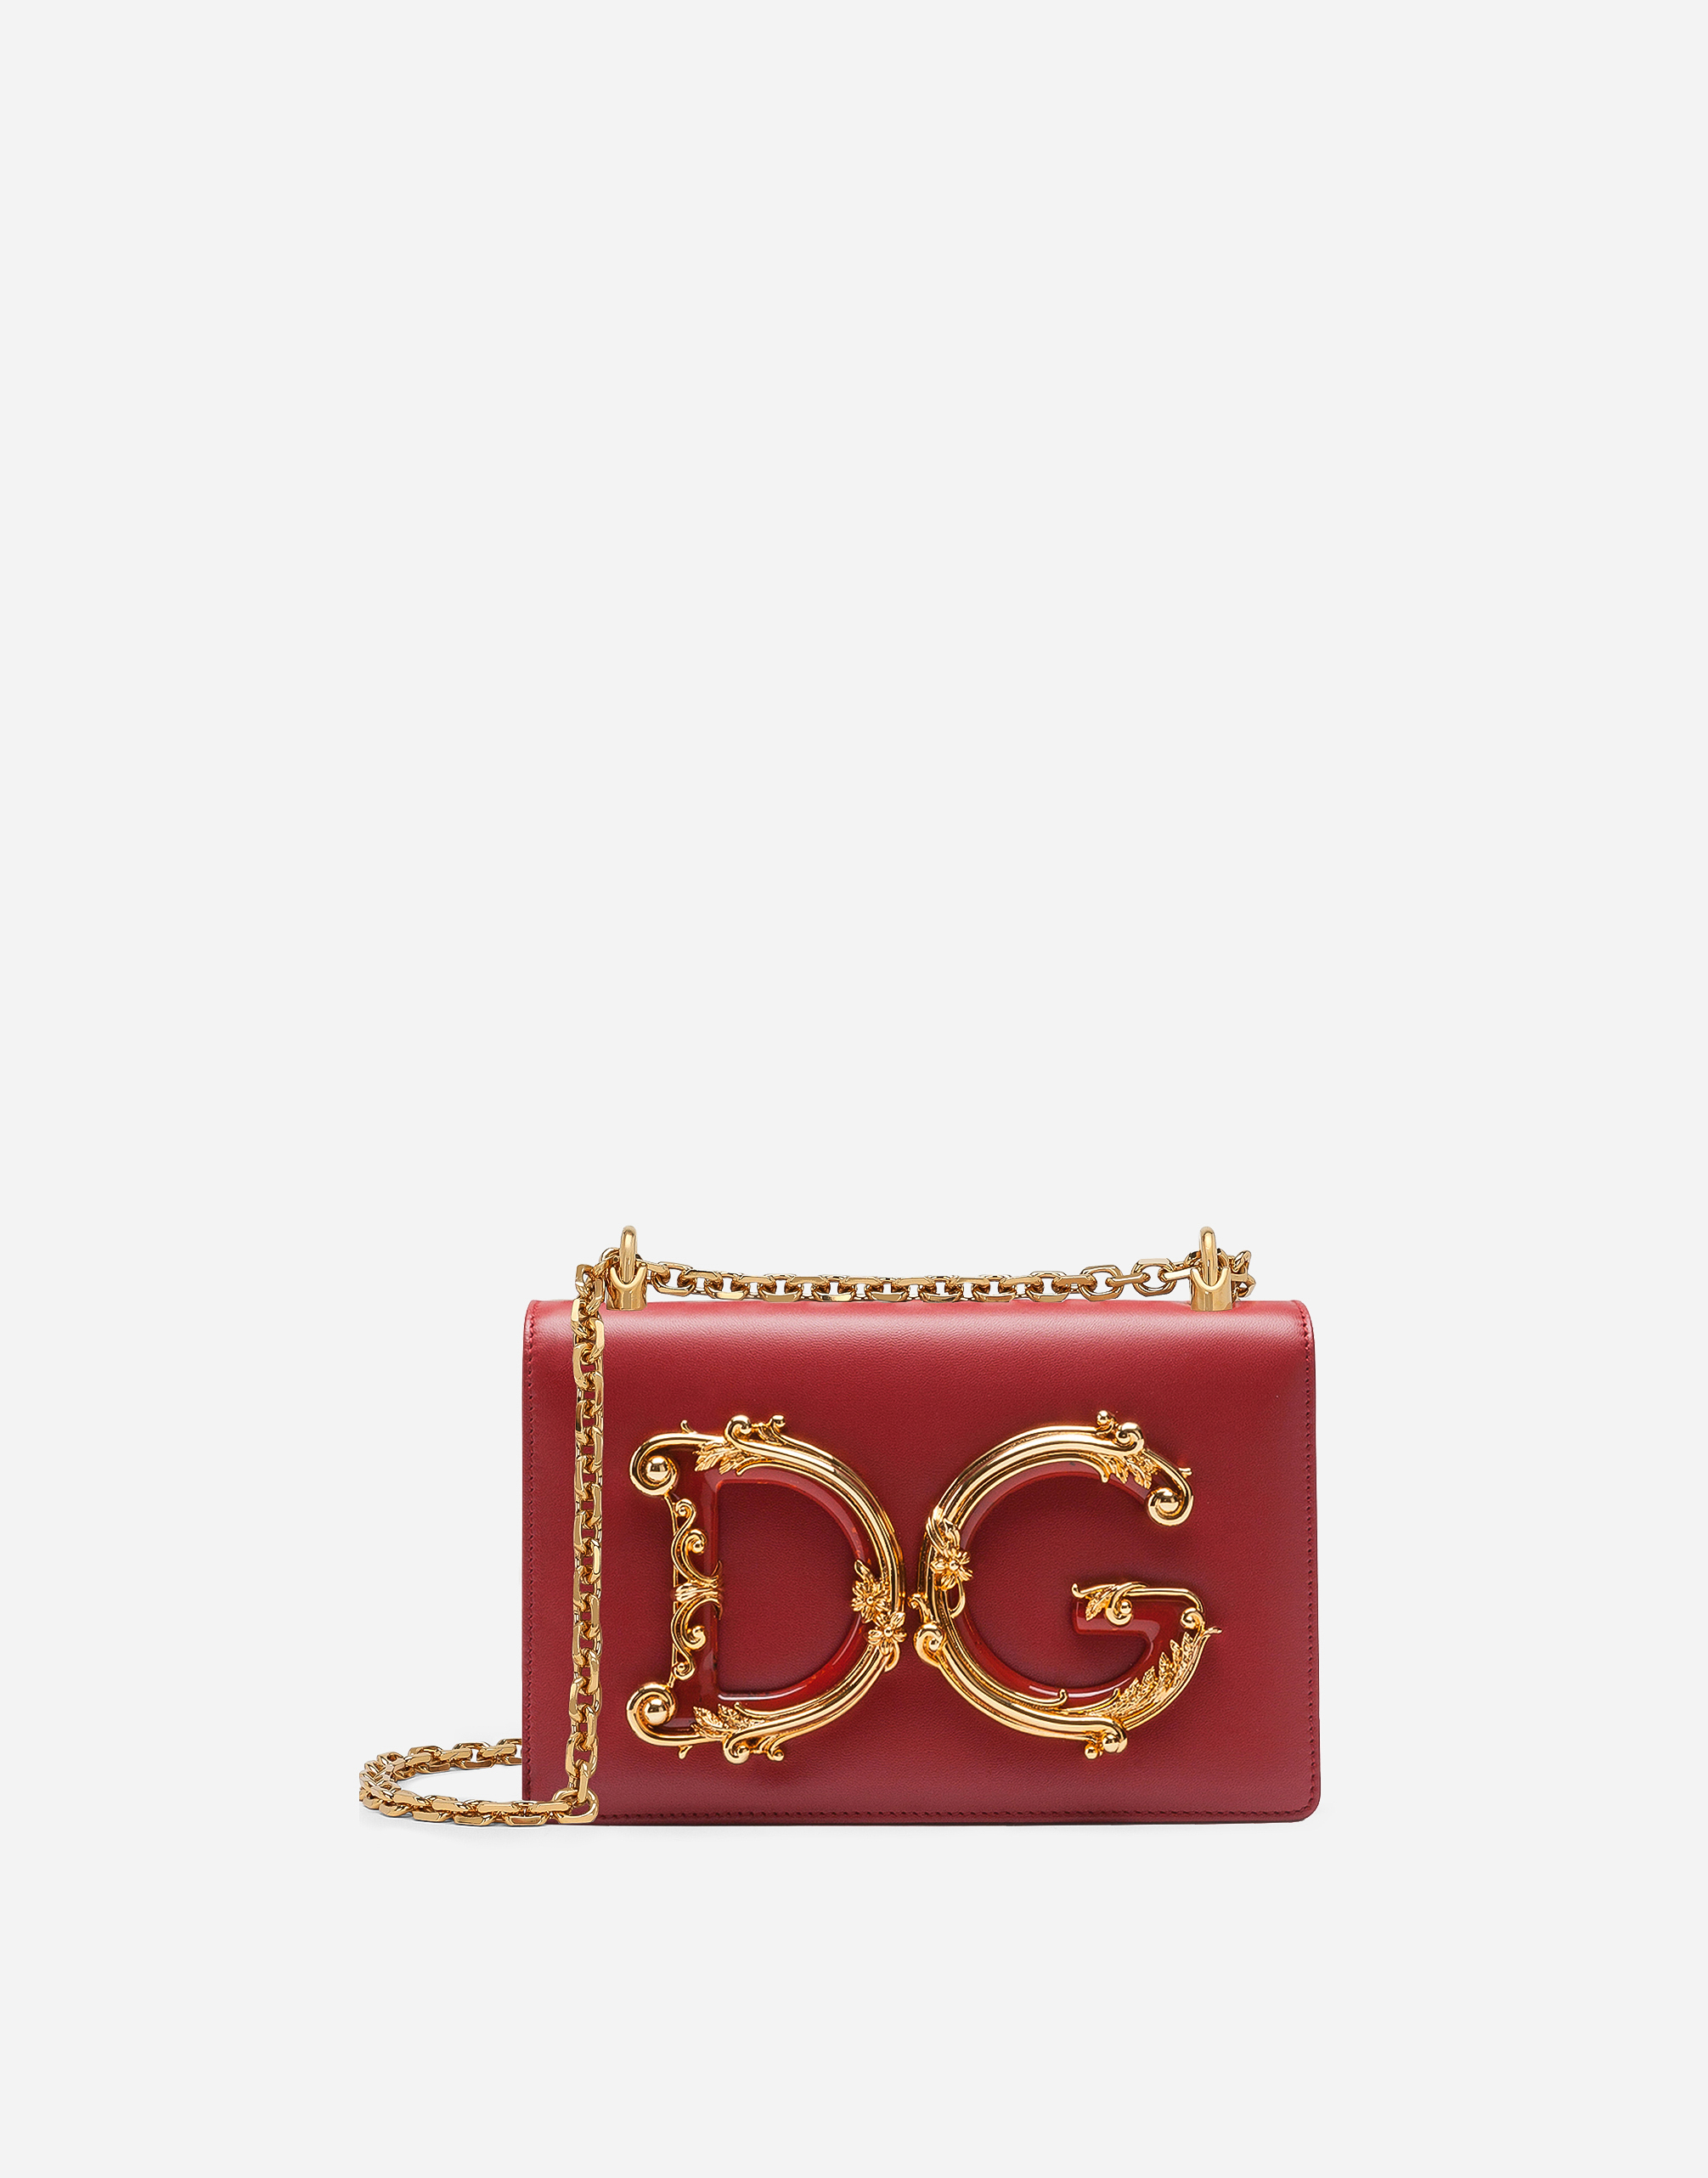 Dolce & Gabbana Nappa Leather Dg Girls Bag In Red